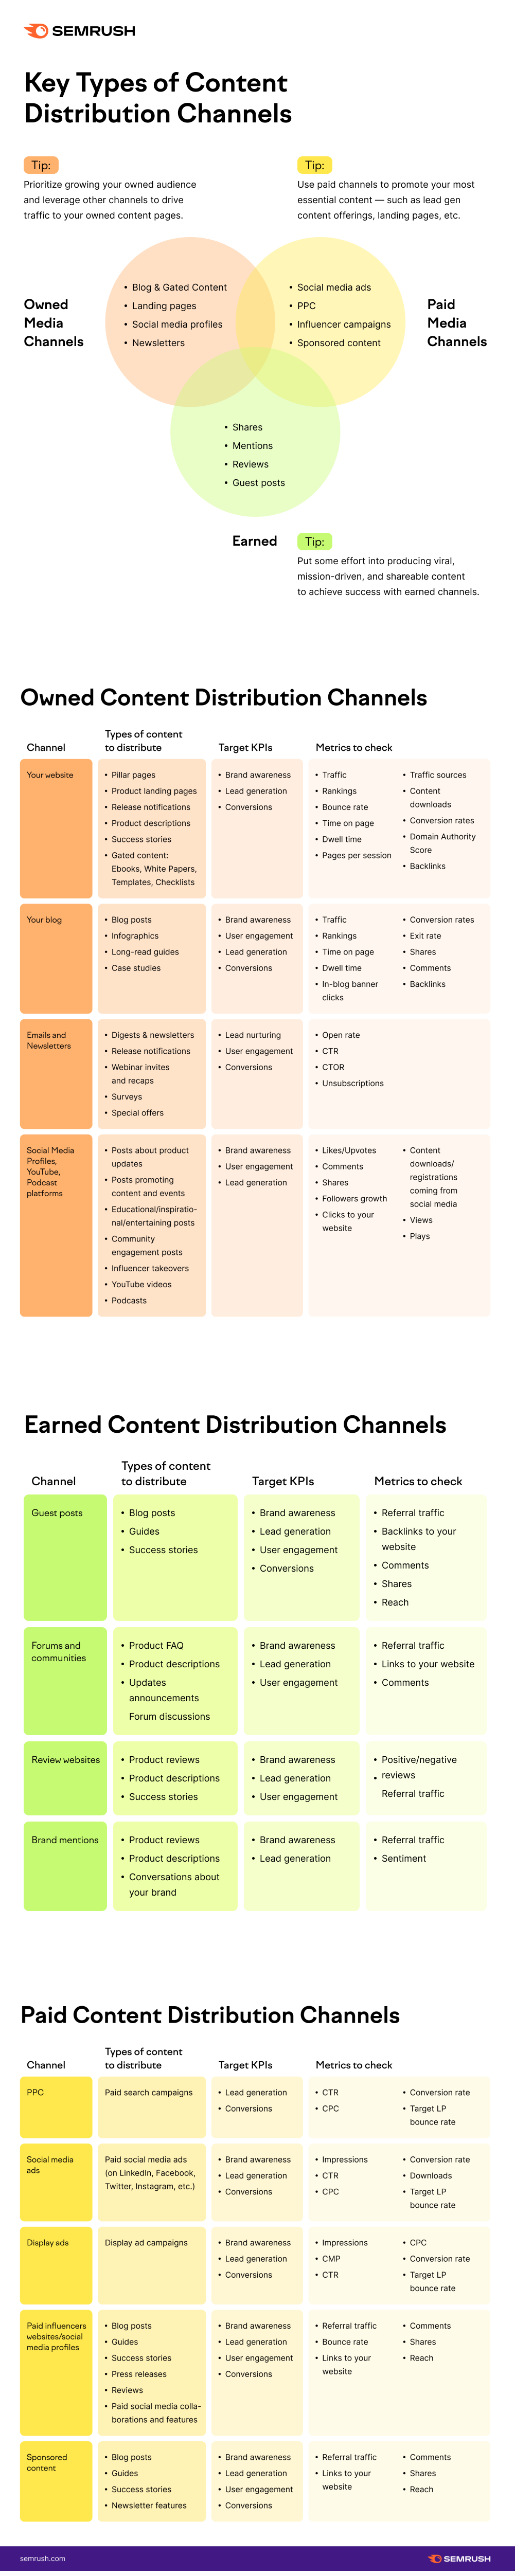 key types of content distribution channels infographic